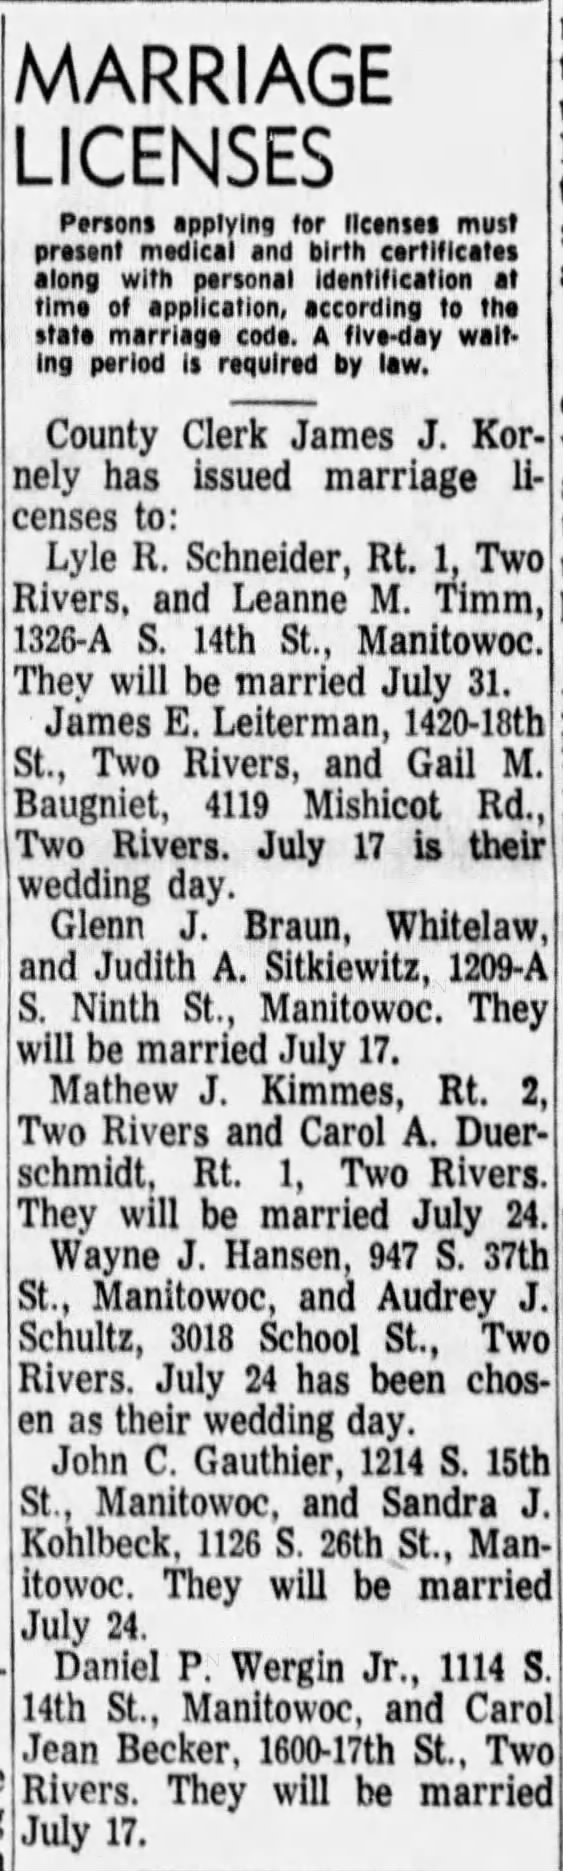 marriages announced for July 17, 1965